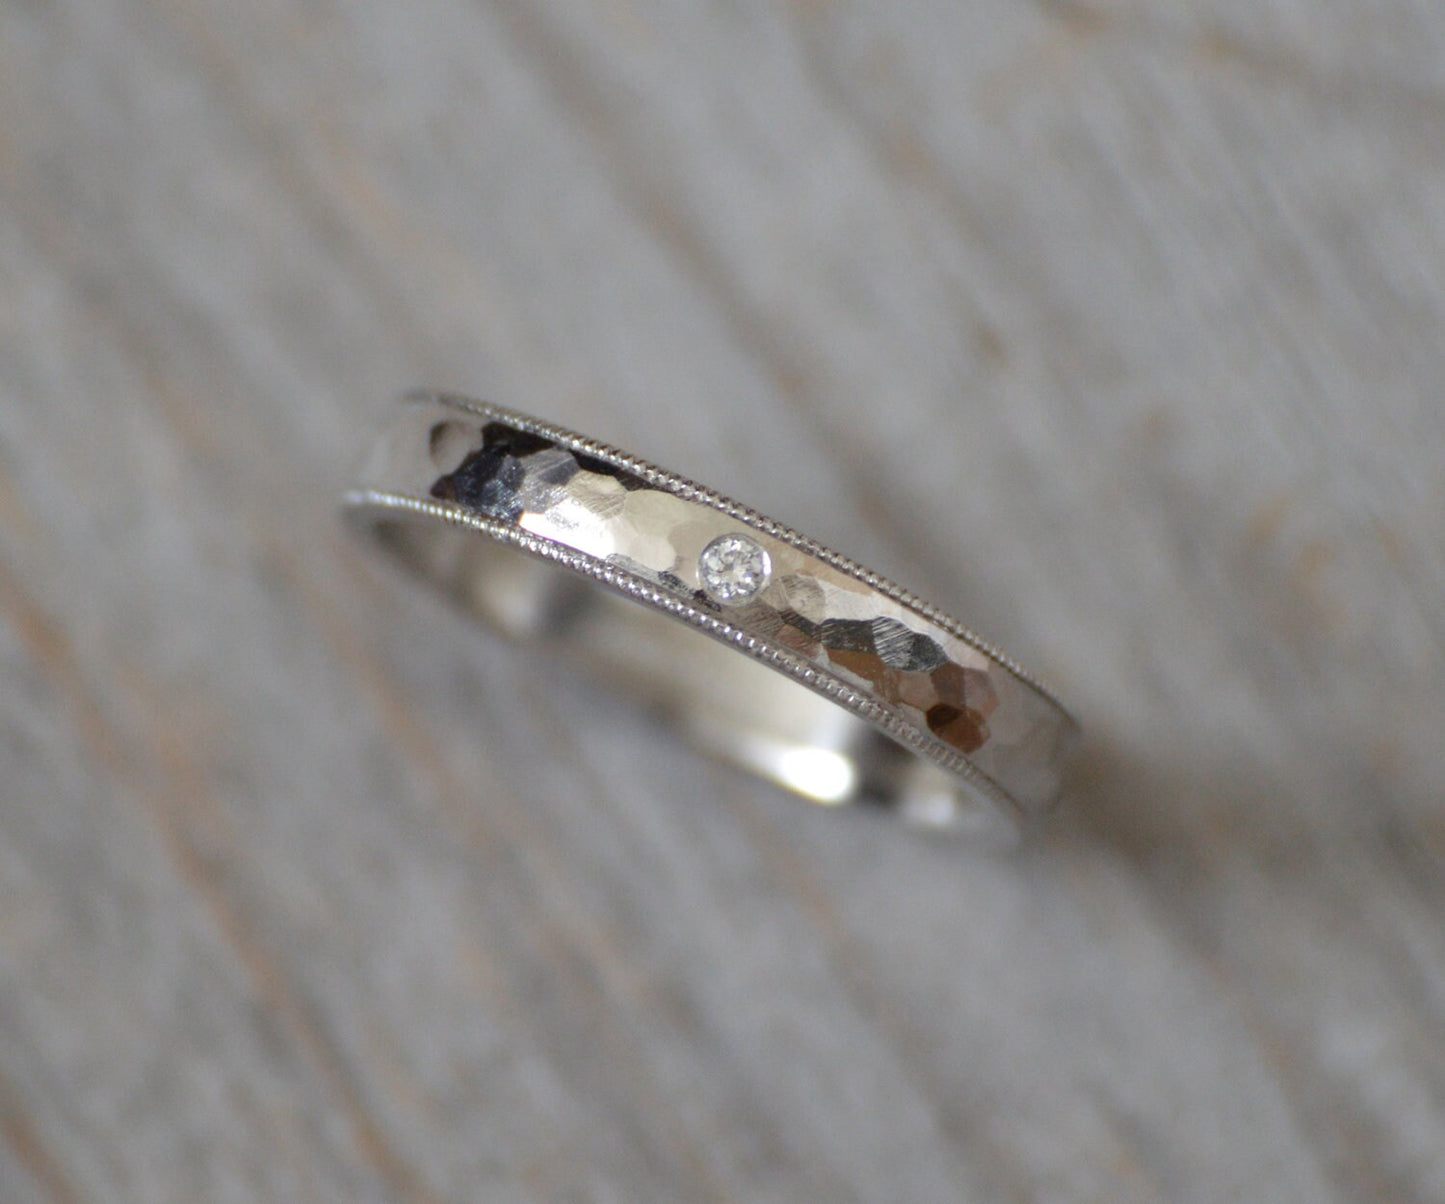 Platinum Milgrain Wedding Band With A Diamond, Milgrain Platinum Wedding Ring With Diamond, Rustic Wedding Band, Made To Order, 3mm Ring